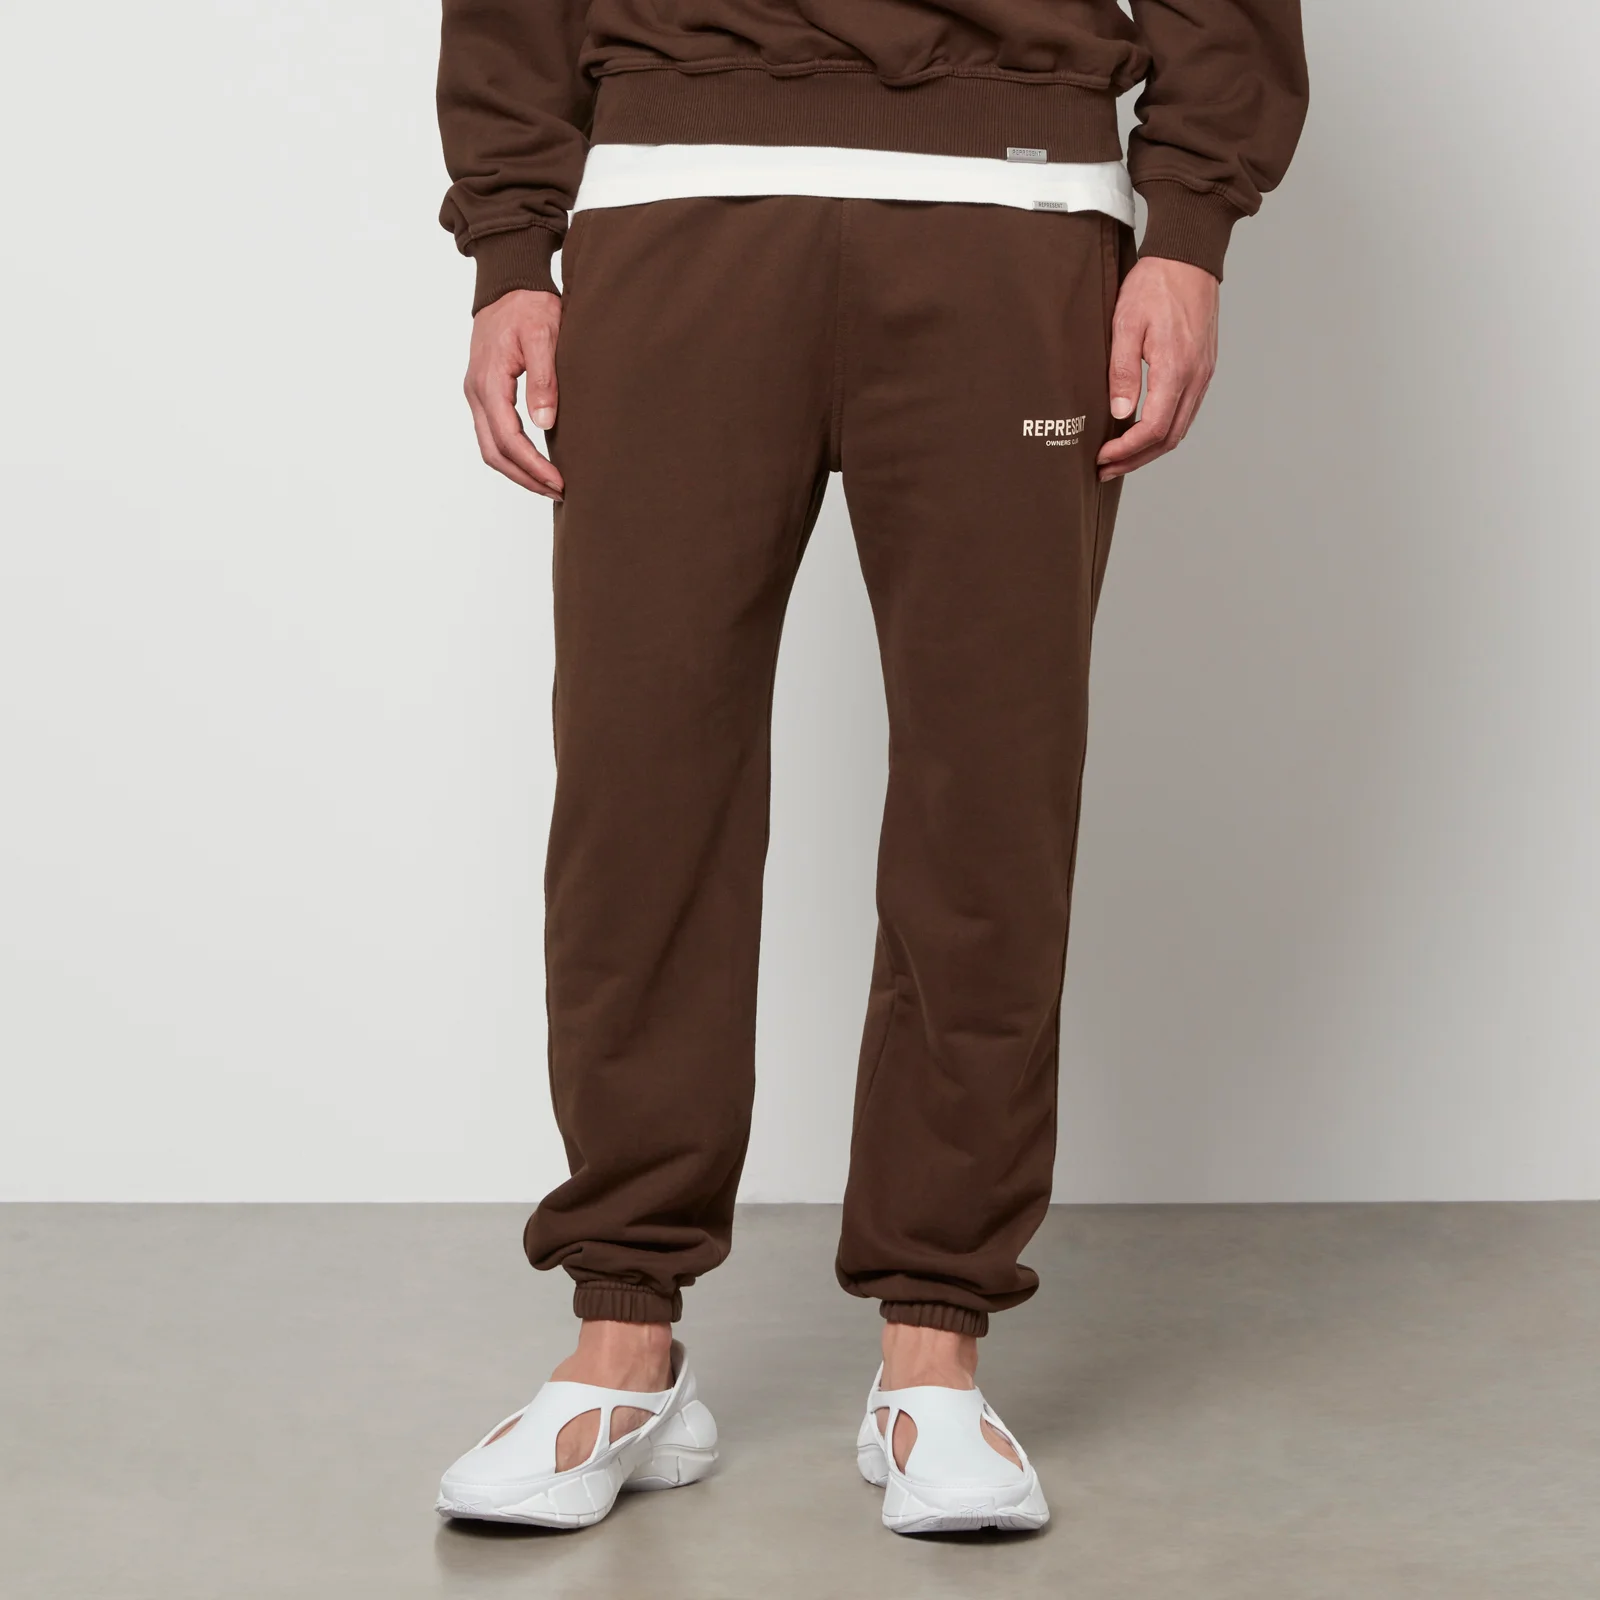 Represent Owners Club Relaxed Cotton-Jersey Joggers Image 1